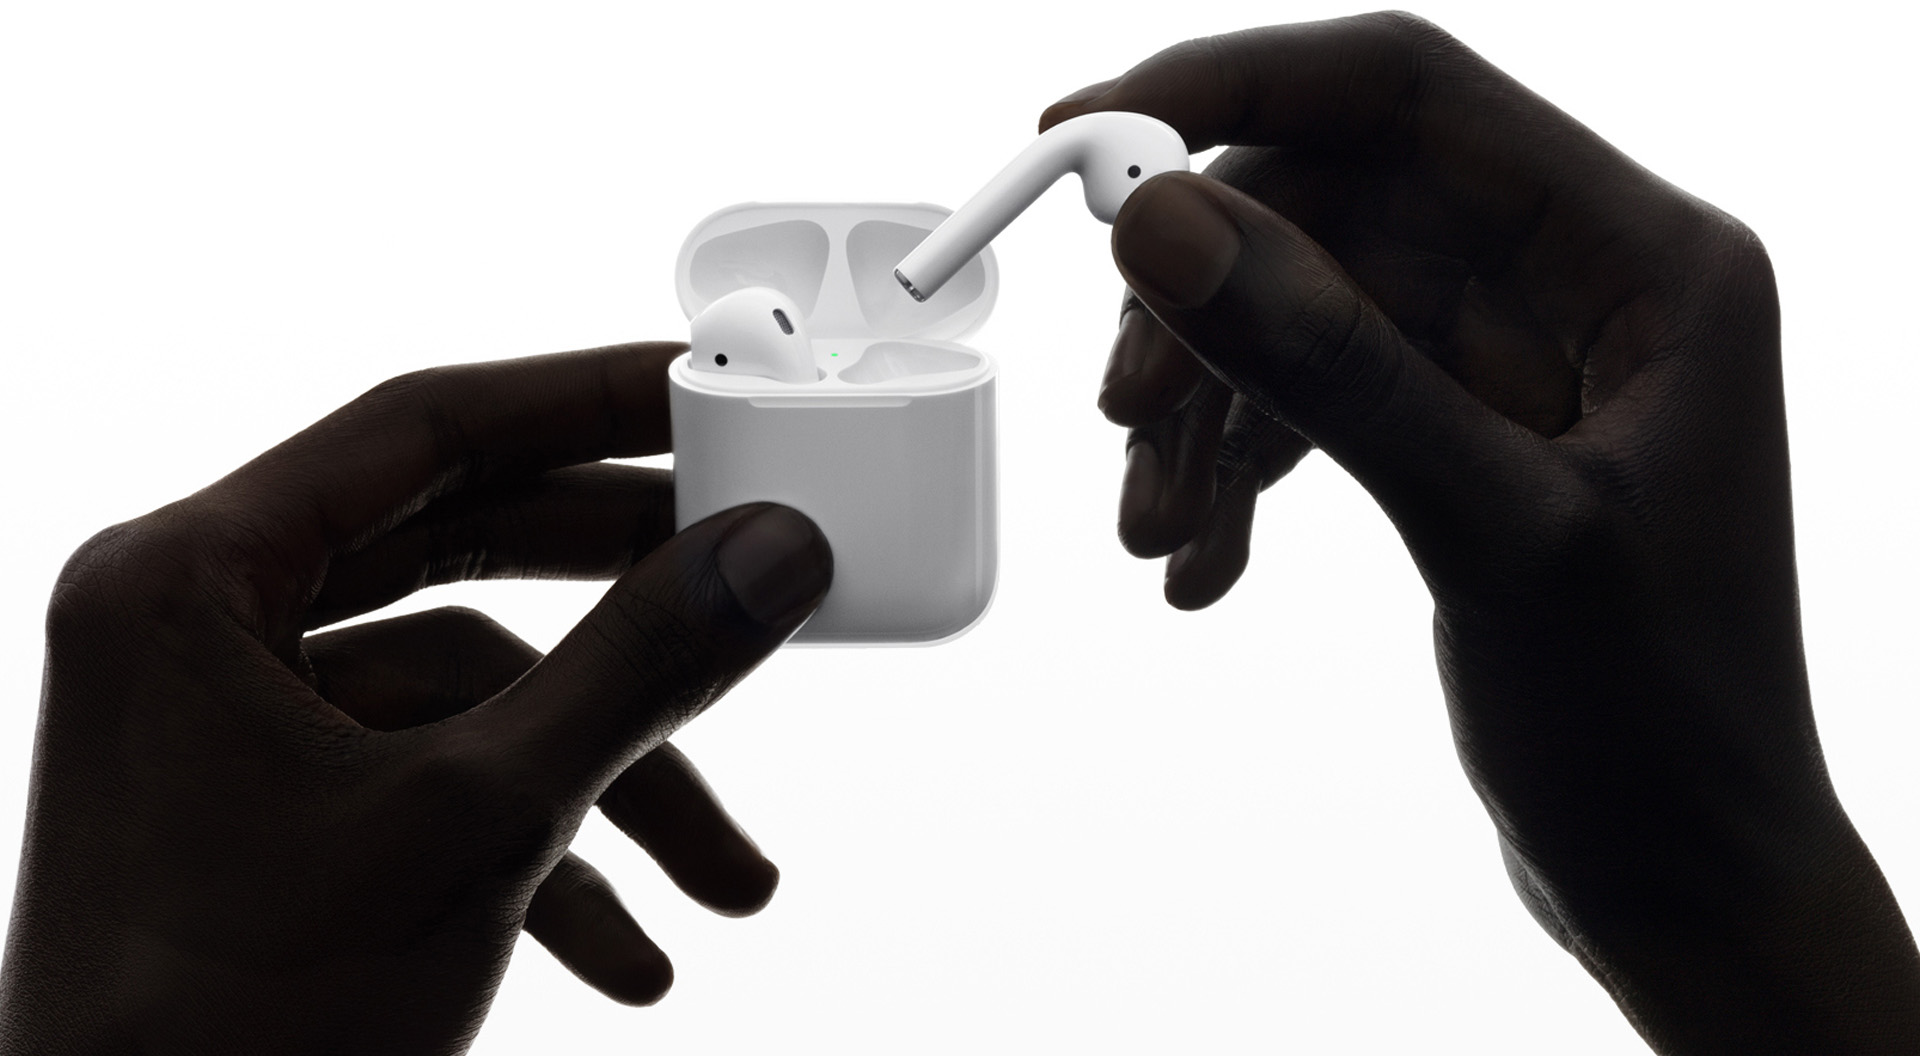 CISI-Airpods-Aug-2019